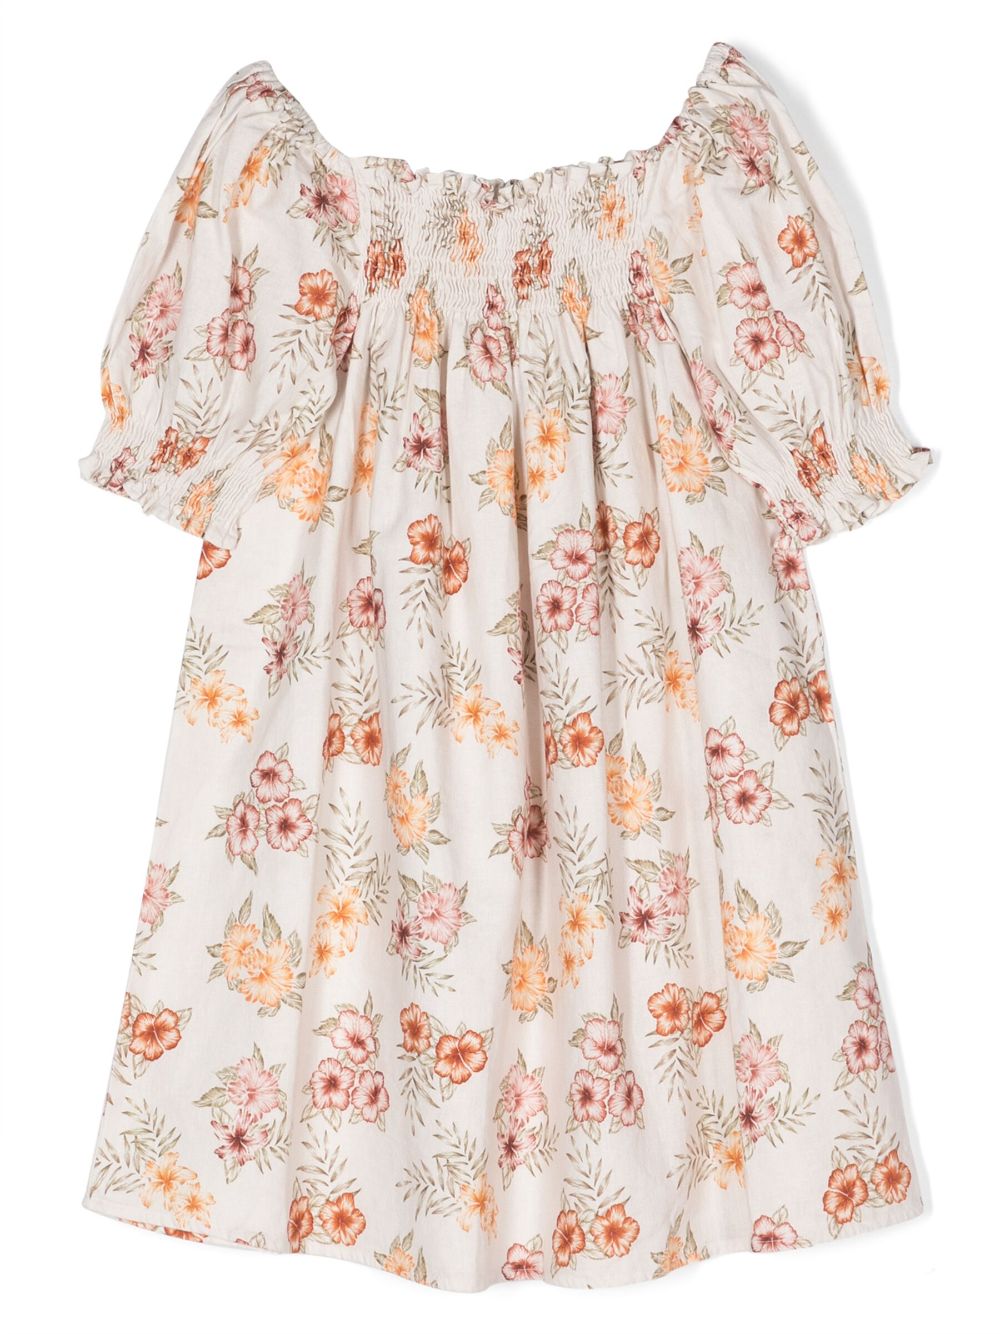 THE NEW SOCIETY floral-print dress - Neutrals